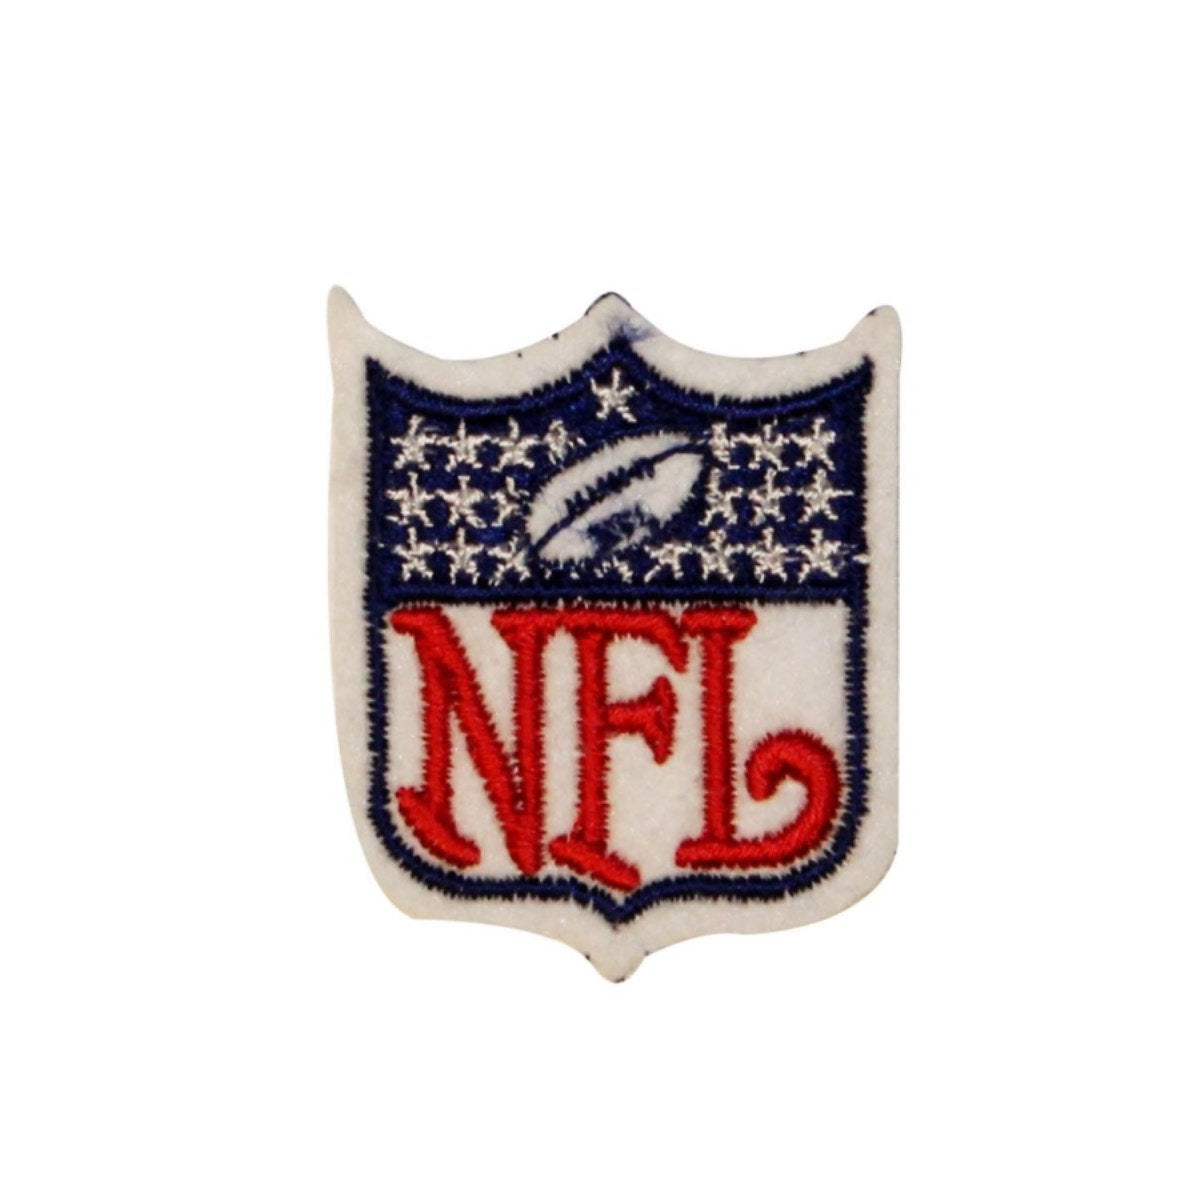 Pro Football Iron on Patches, Approx 4 See Description for Size Details